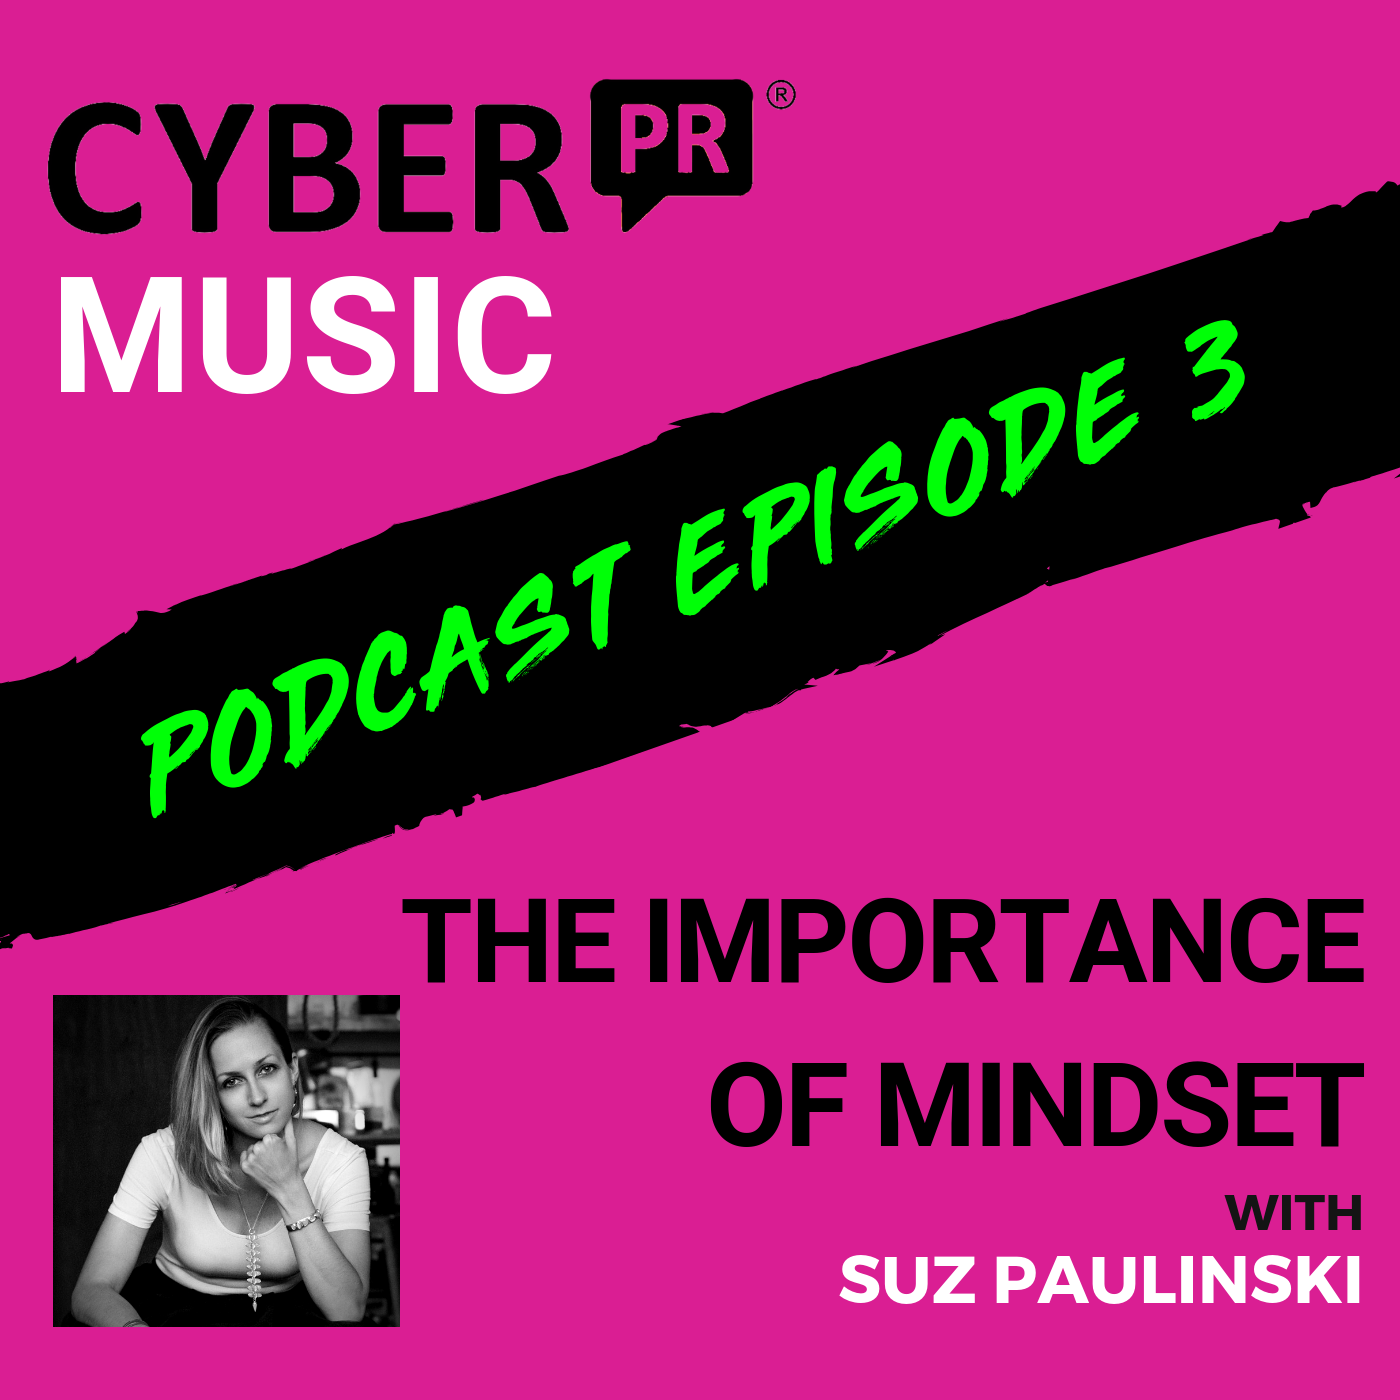 The Cyber PR Music Podcast EP 3: Suz Paulinski & The Importance of Mindset